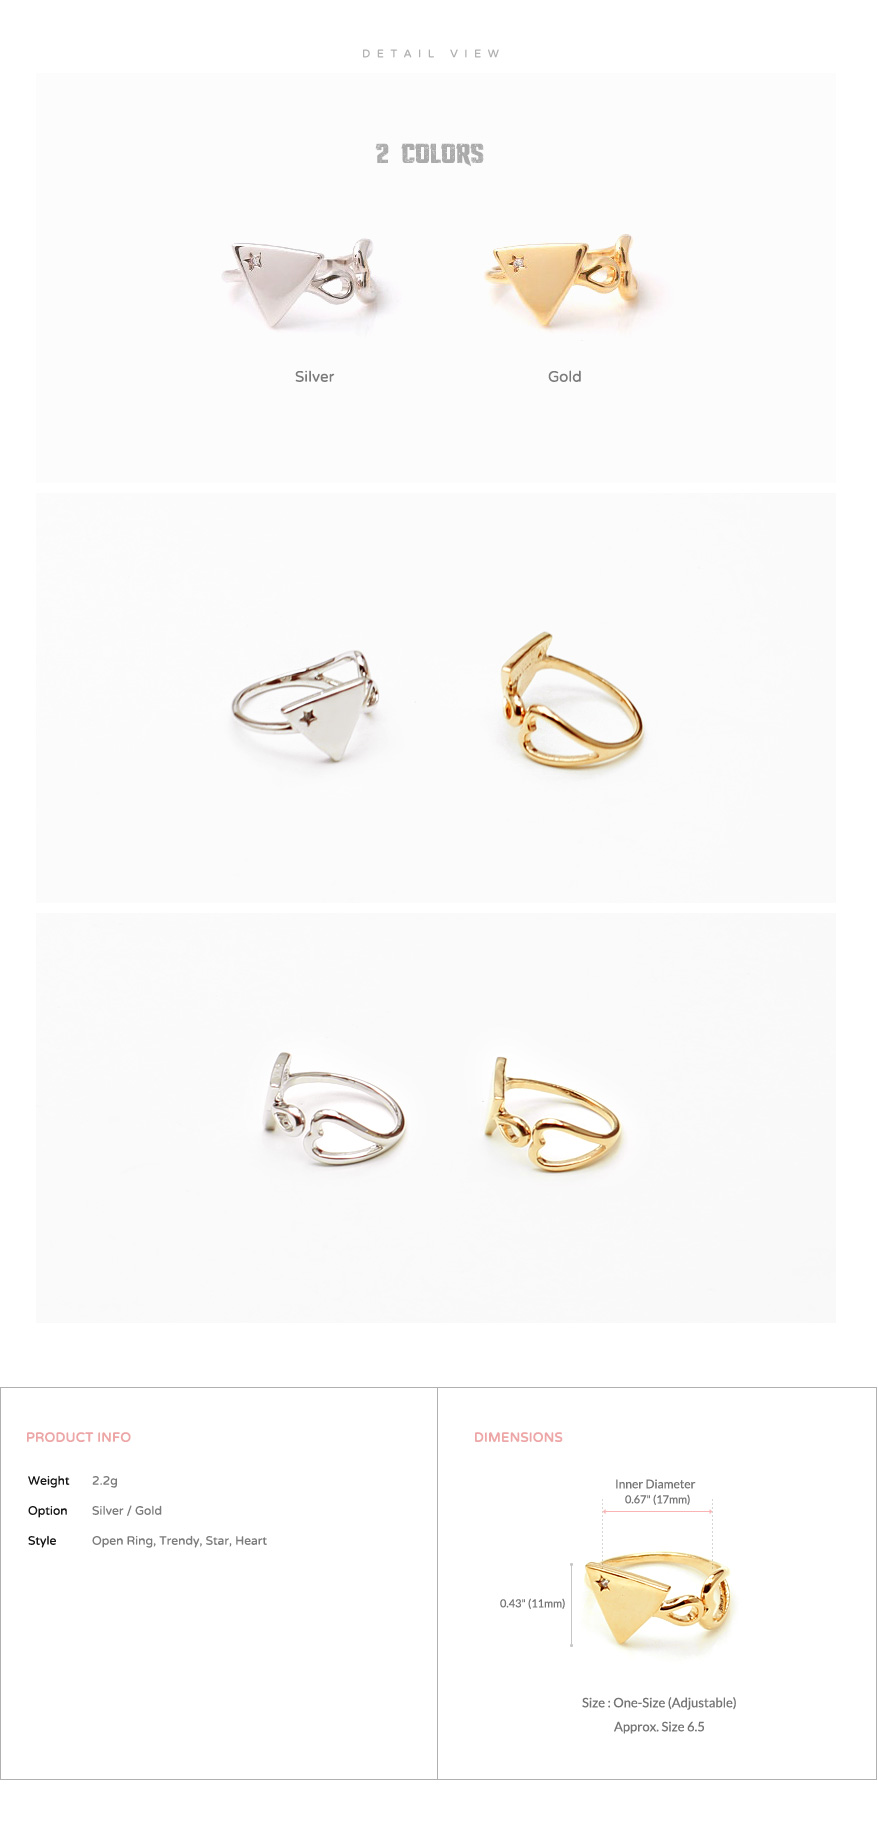 accessories_korean_asian_style_jewelry_open_ring_gold_trendy_cz_cubic_zirconia_triangle_heart_5